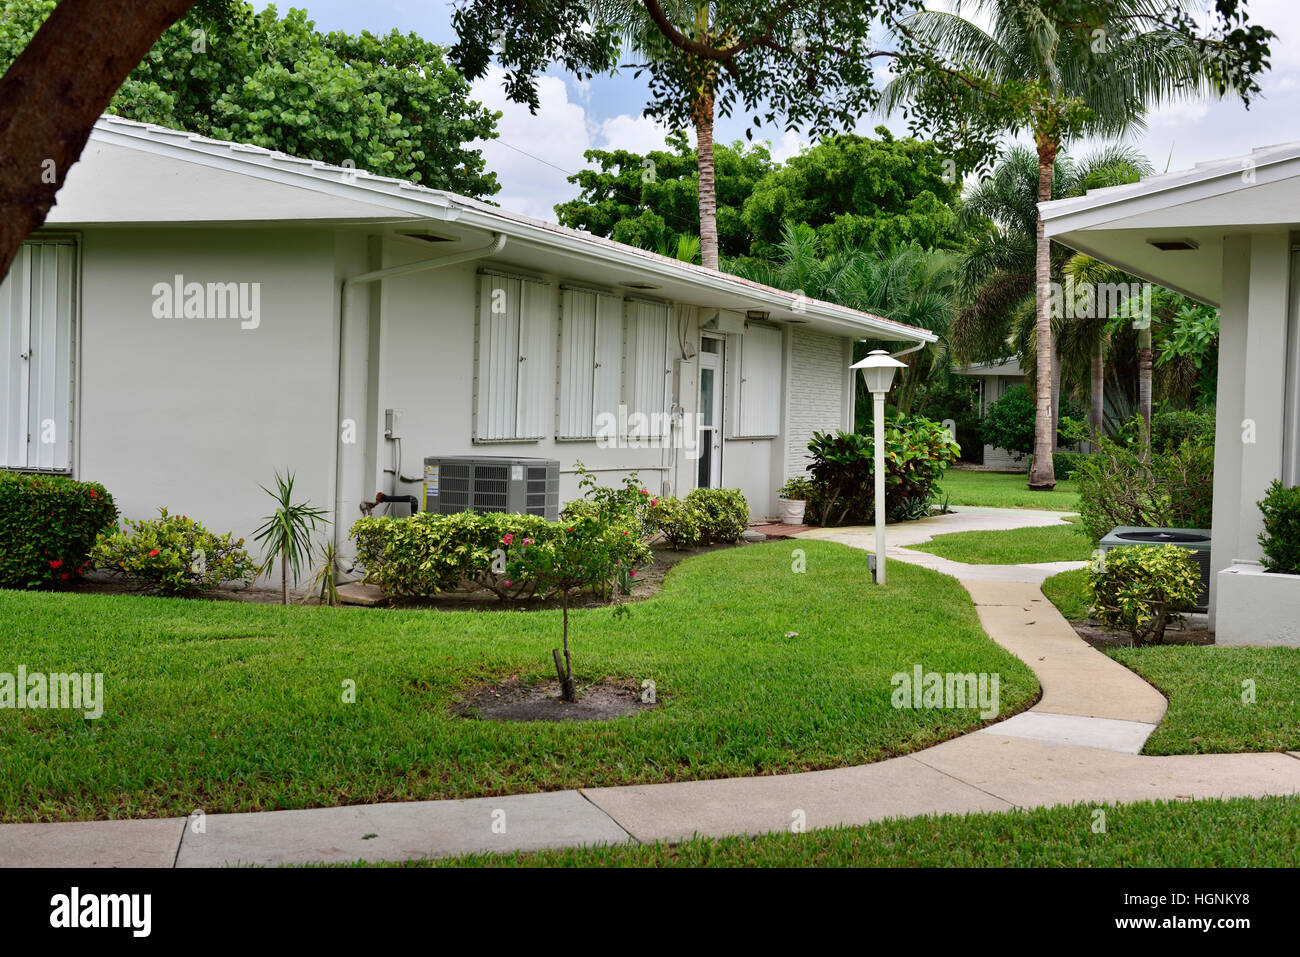 Coop residential housing Pompano Beach, Florida, storm shutters Stock Photo